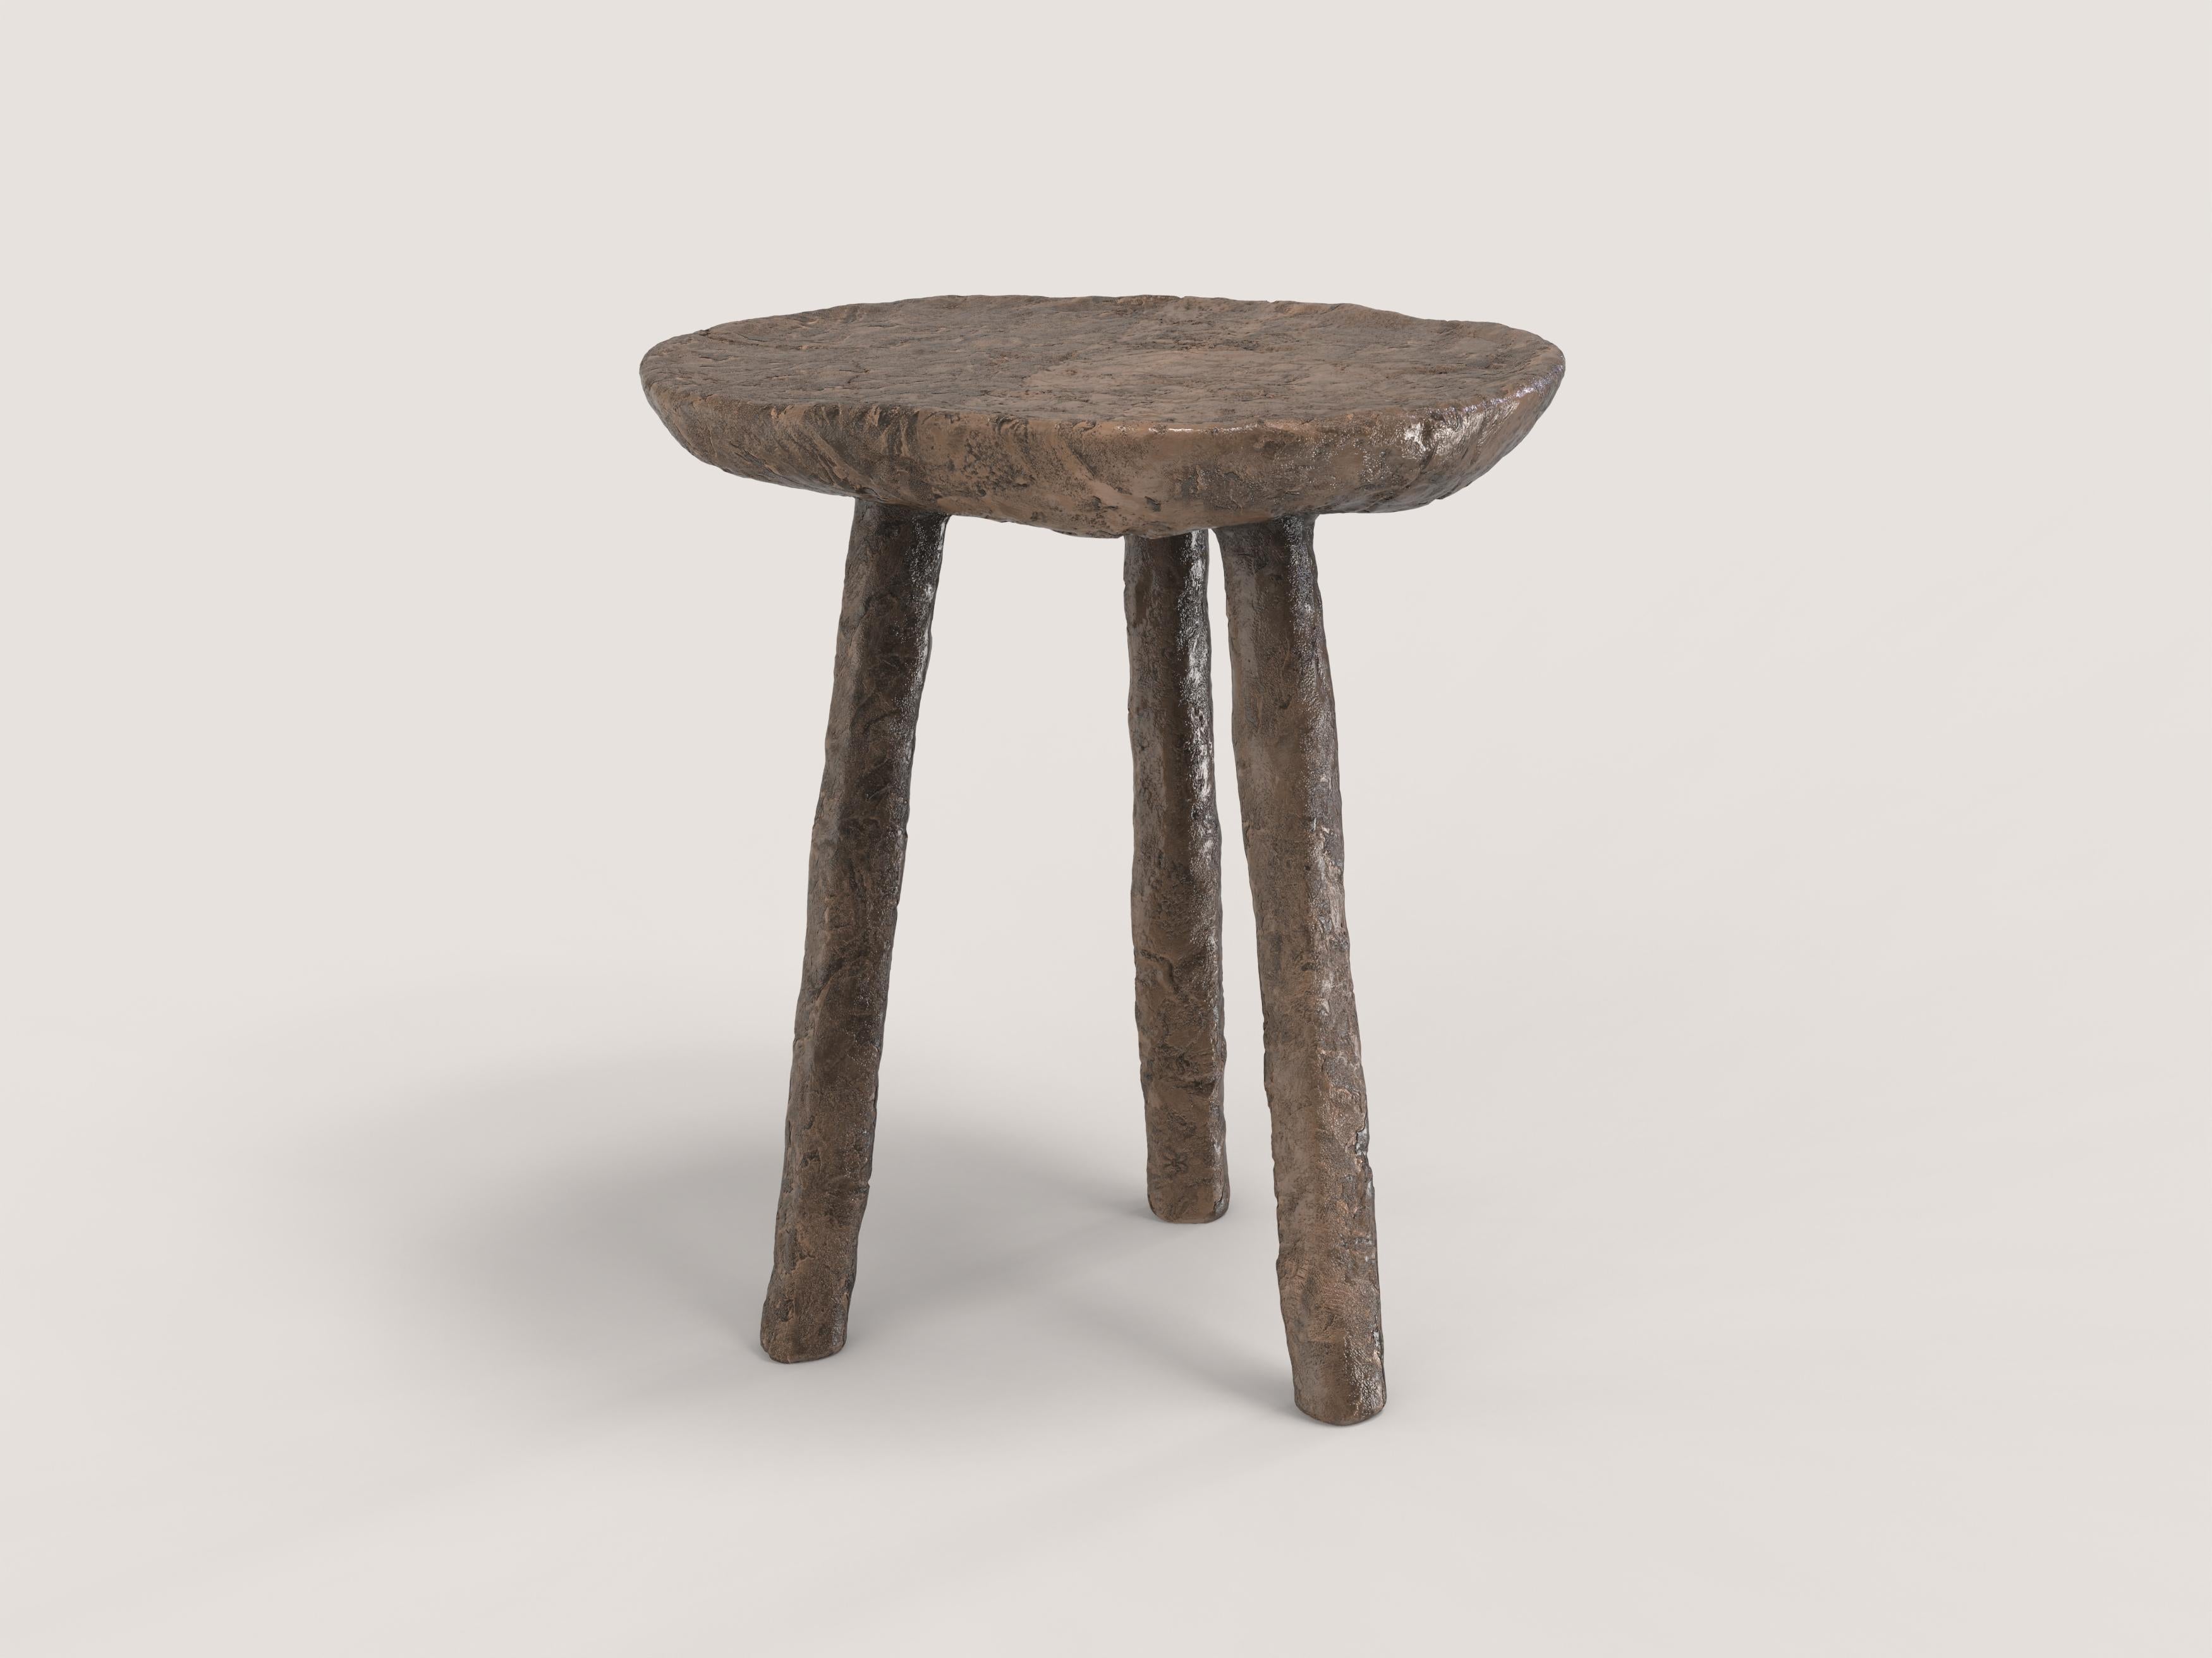 Comma V1 Stool by Edizione Limitata
Limited edition of 150 pieces. Signed and numbered.
Dimensions: D 34 x W 34 x H 39 cm.
Materials: Cast bronze.

Comma is a 21st century collection of seatings made by Italian artisans in bronze with a green